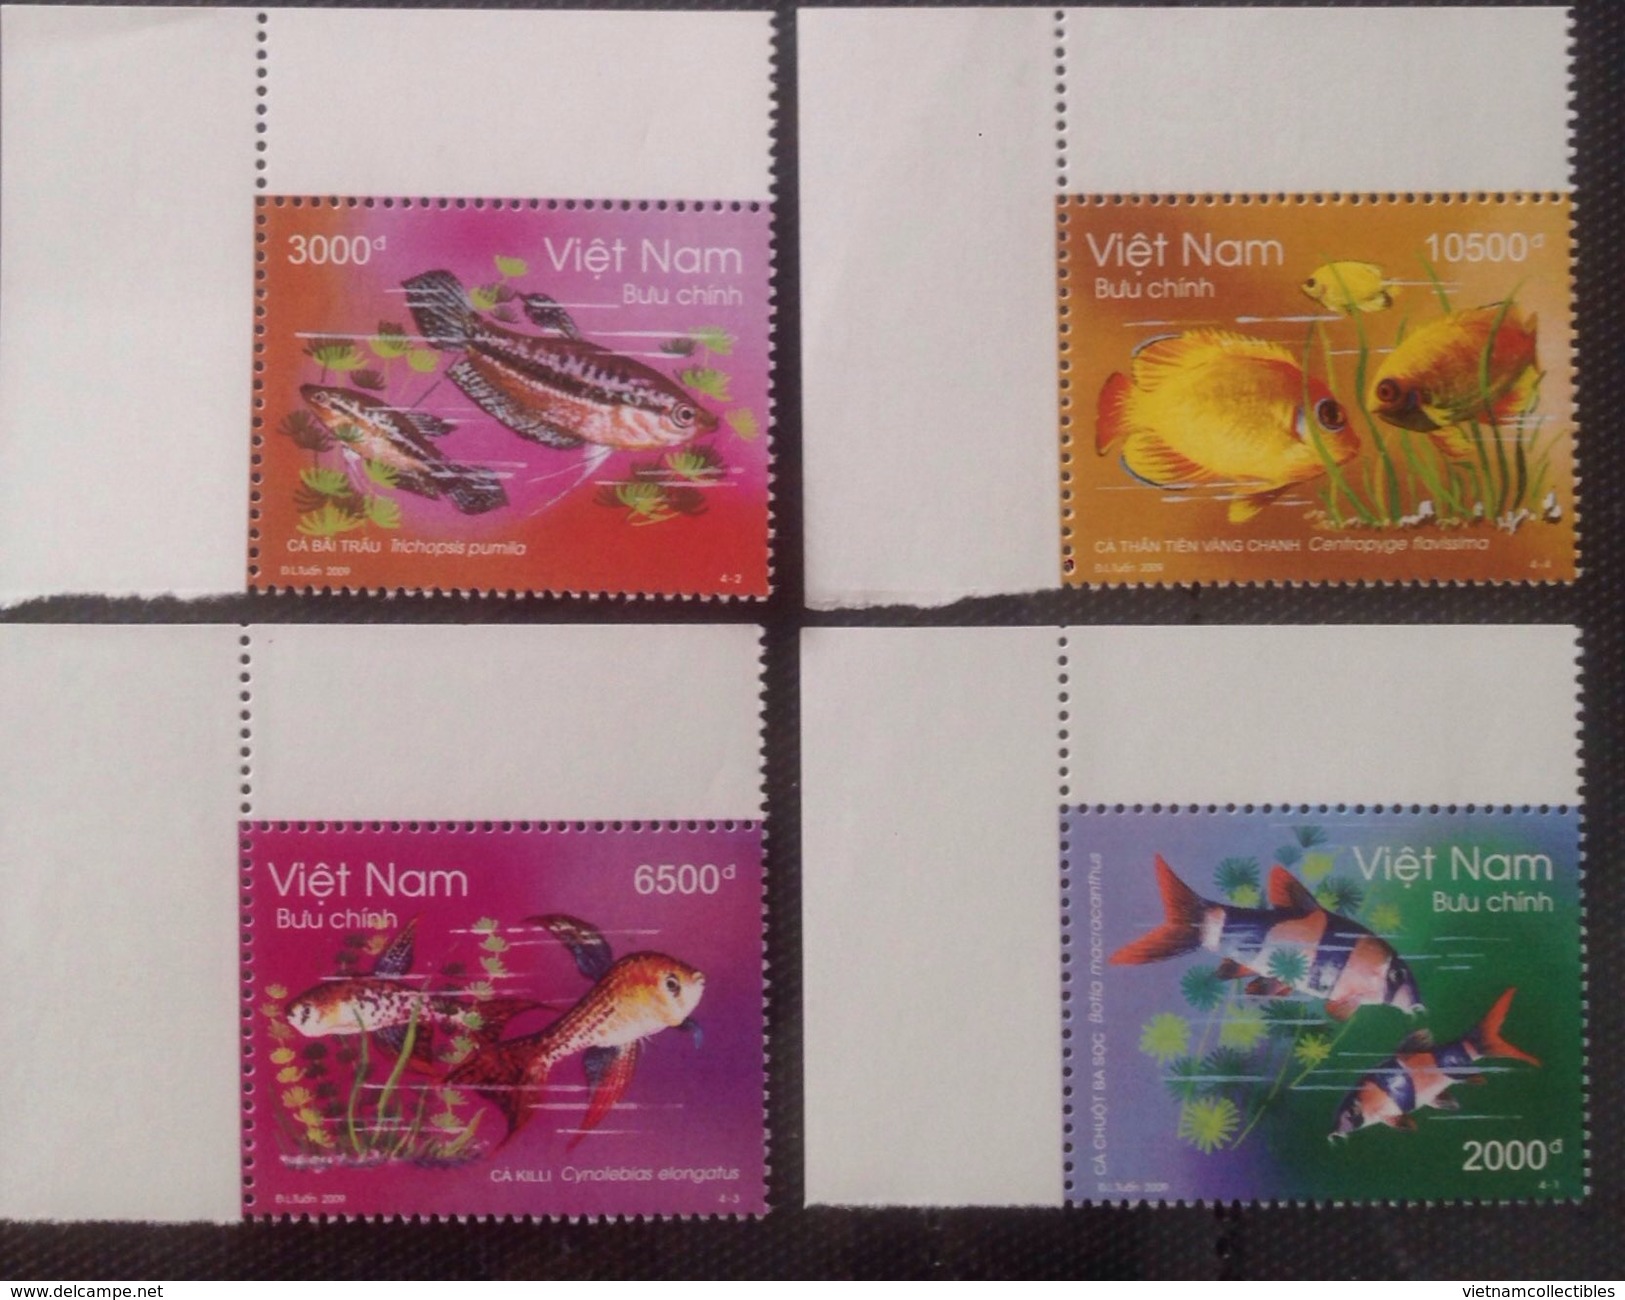 Vietnam Viet Nam MNH Perf Withdrawn Stamps 2009 With Margin Board : Ornamental Fishes / Fish (Ms986) - Vietnam